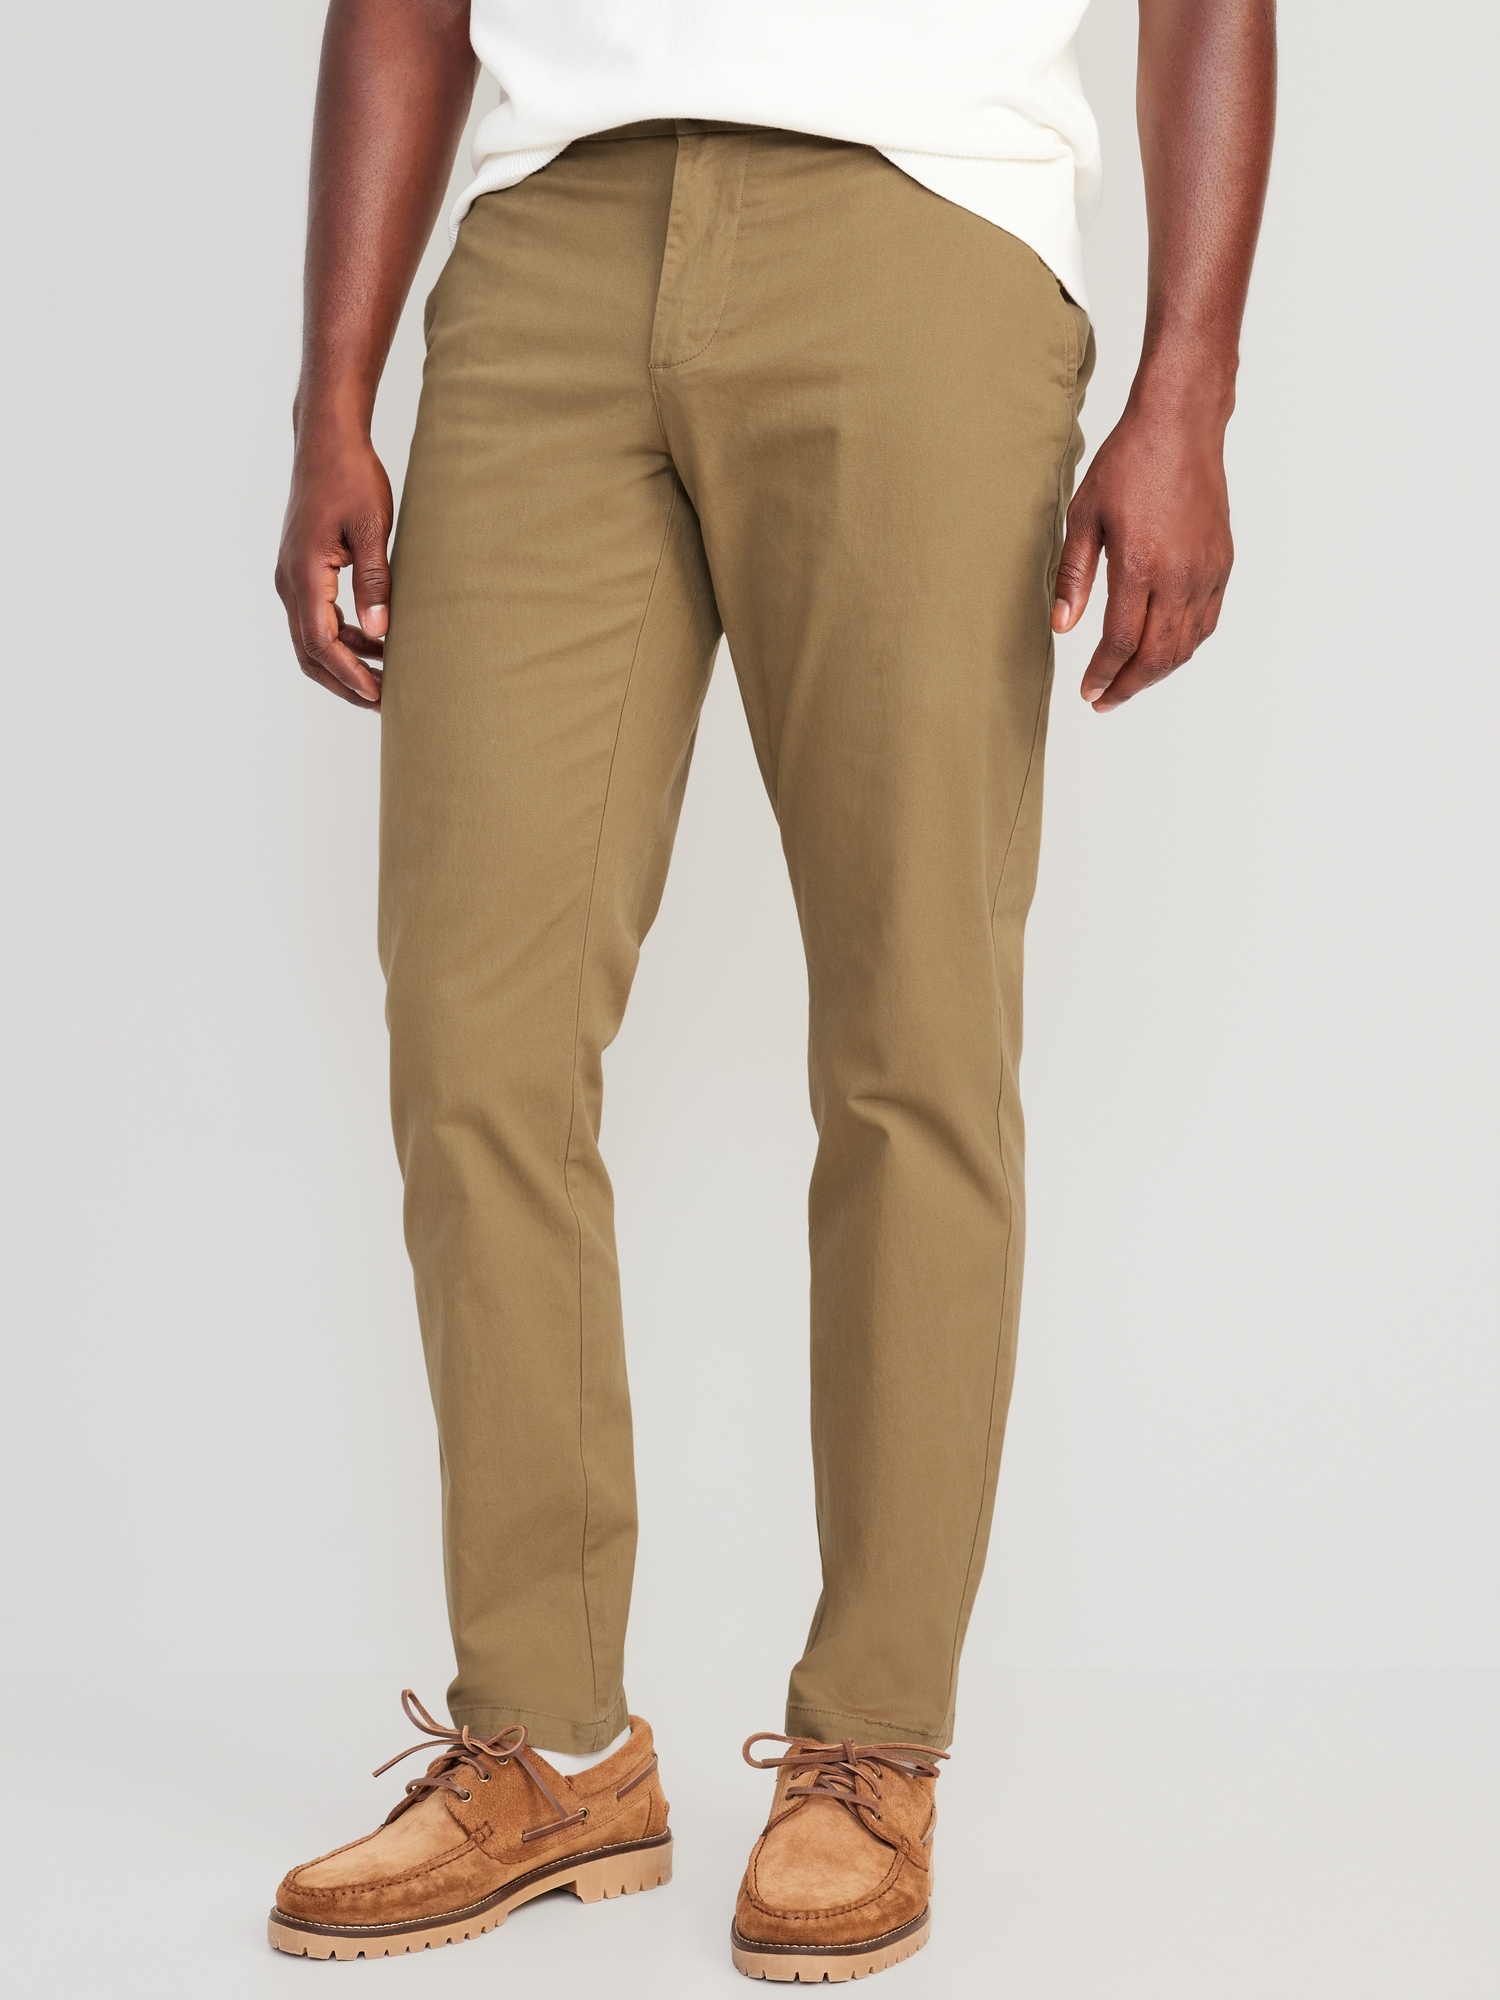 Athletic Built-In Flex Rotation Chino Pants